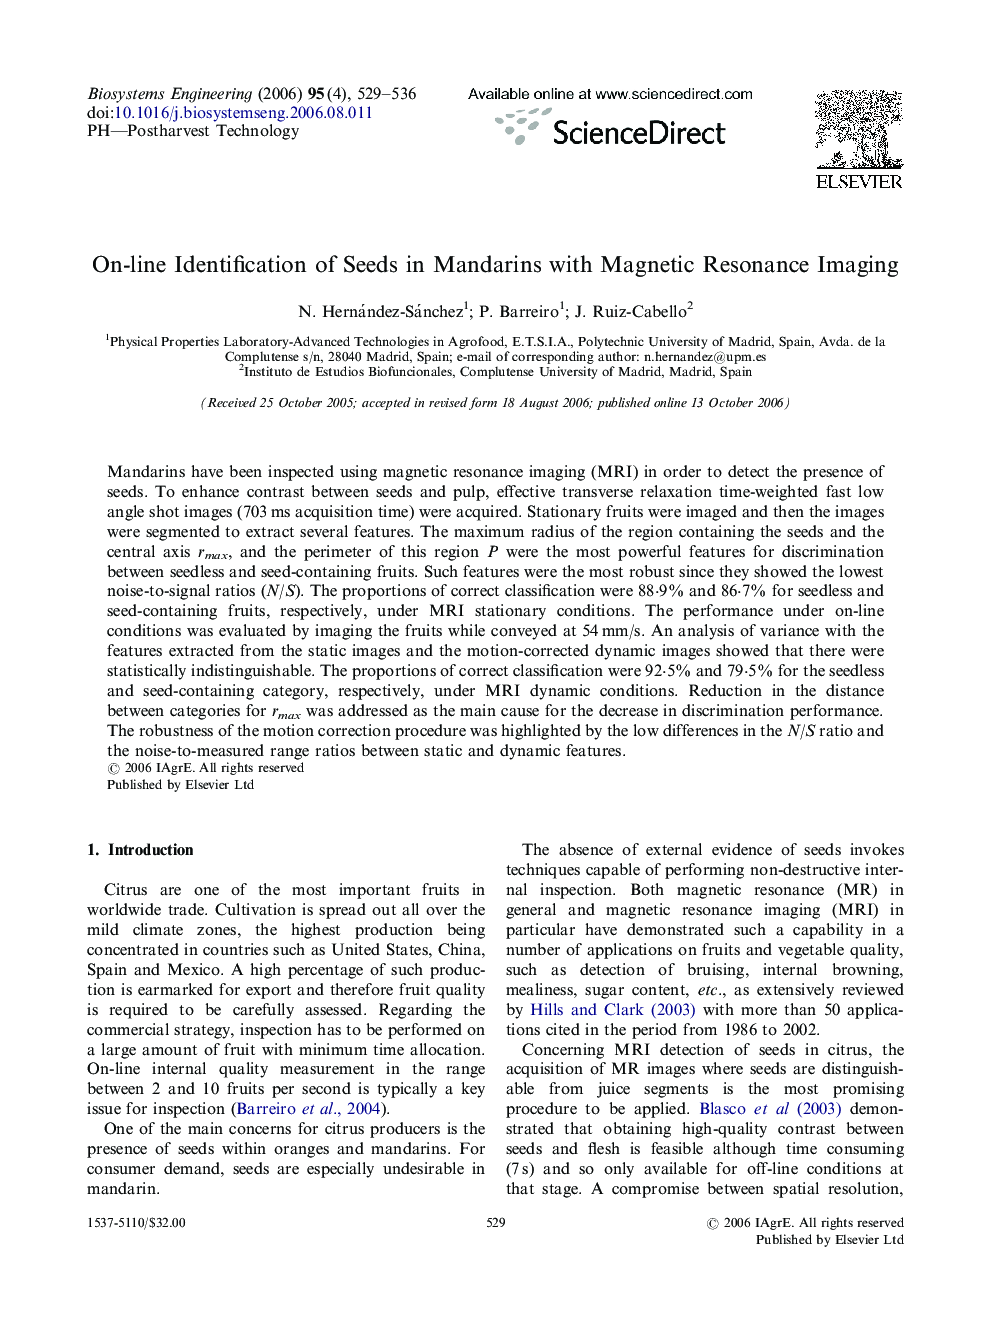 On-line Identification of Seeds in Mandarins with Magnetic Resonance Imaging